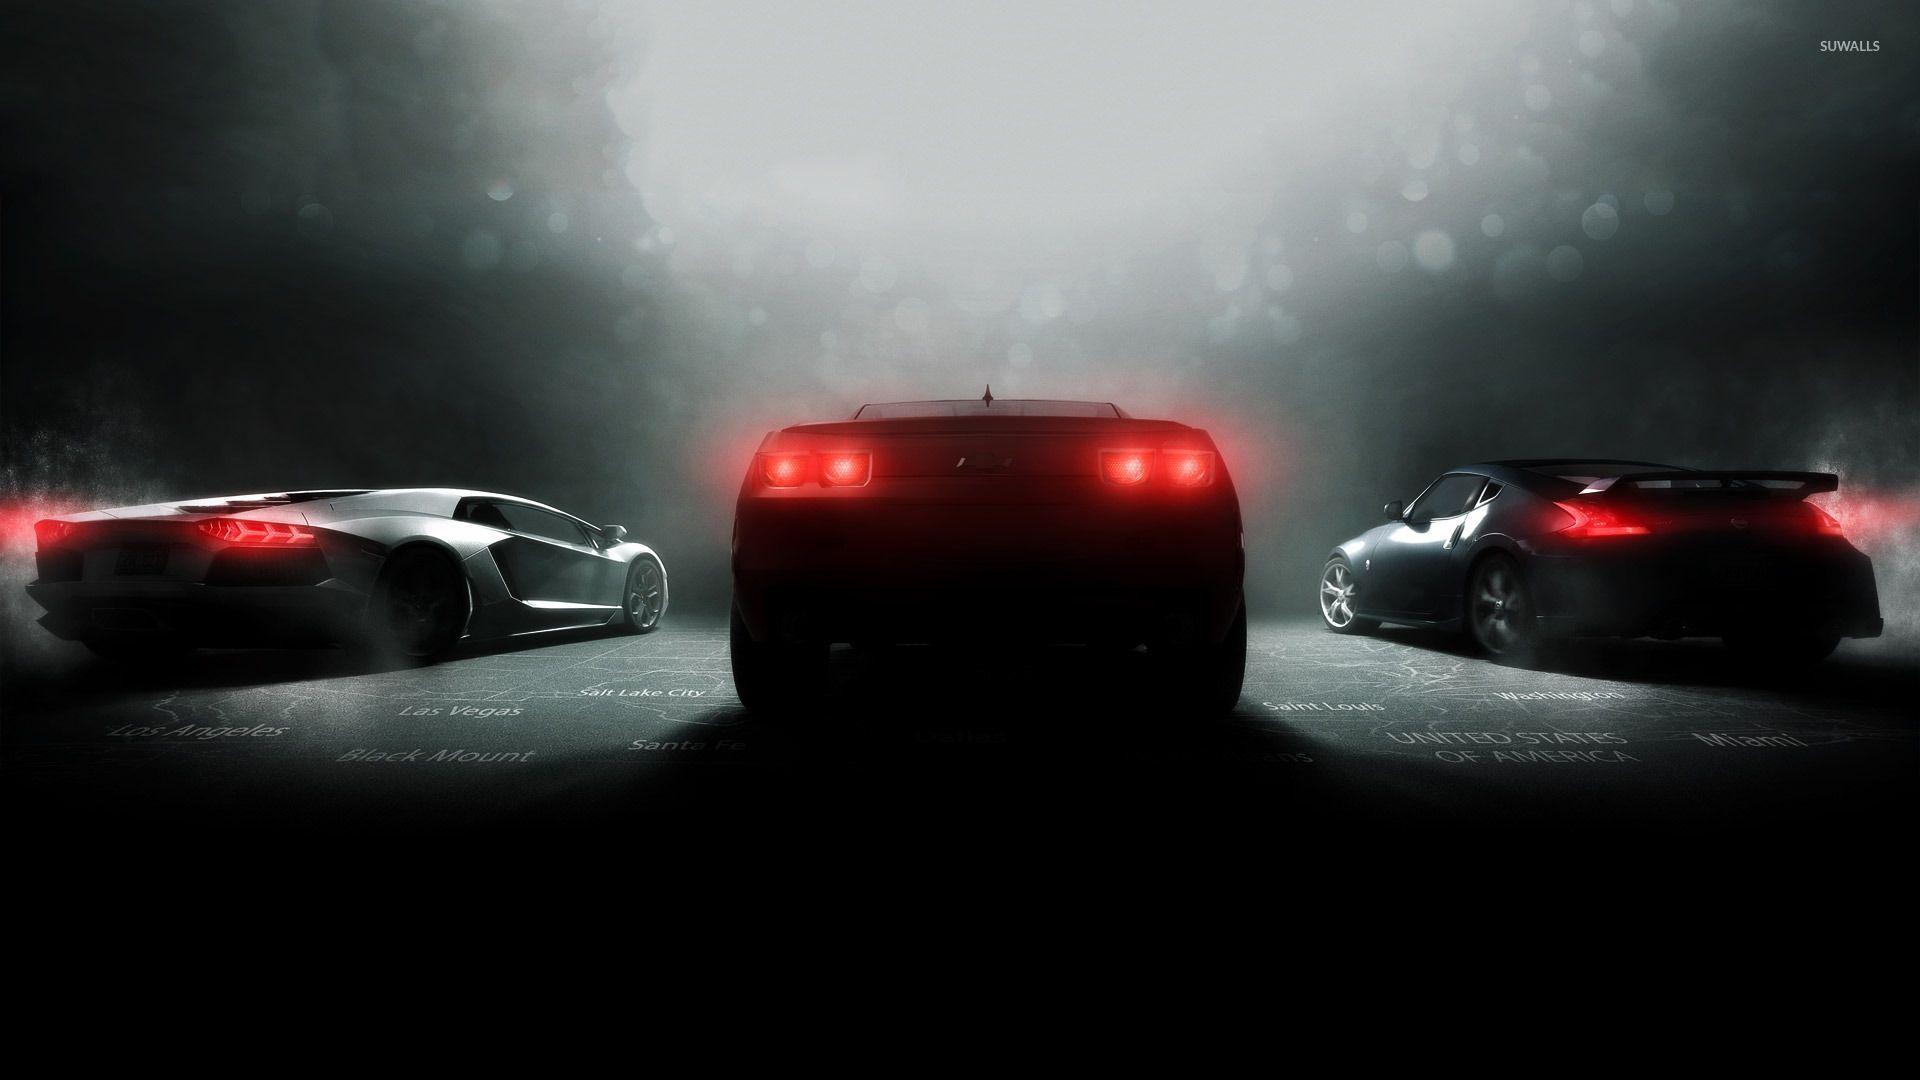 The Crew - Ford Mustang wallpaper - 1459030 | Ford mustang, Mustang,  Mustang wallpaper